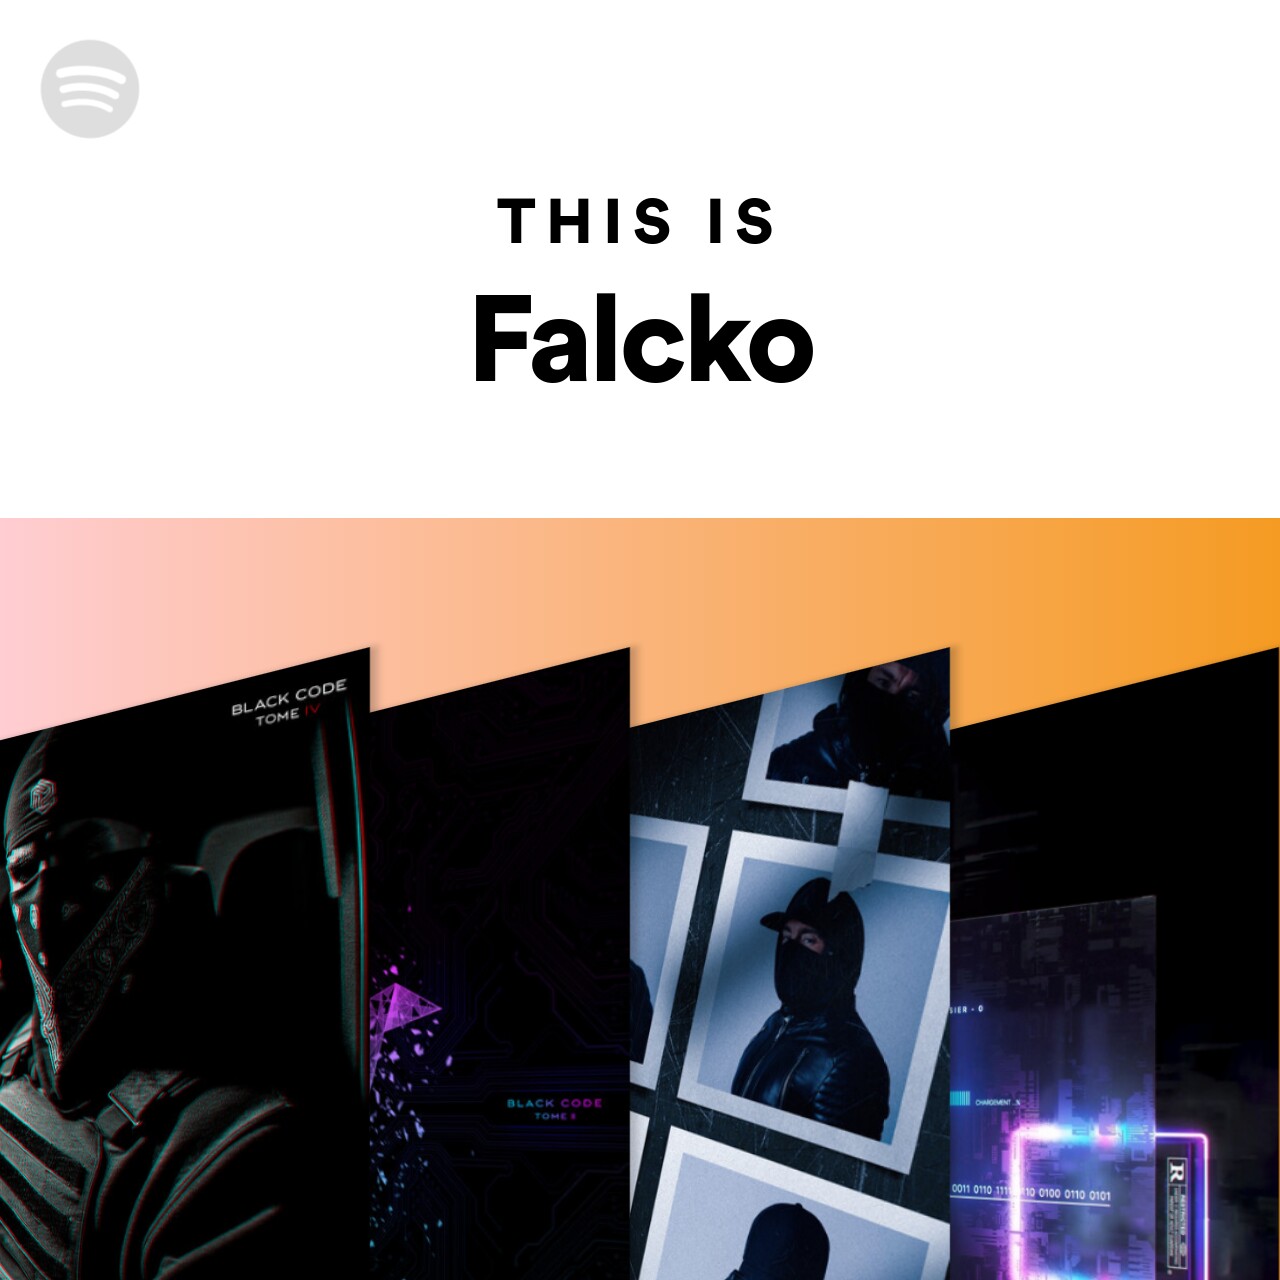 This Is Falcko